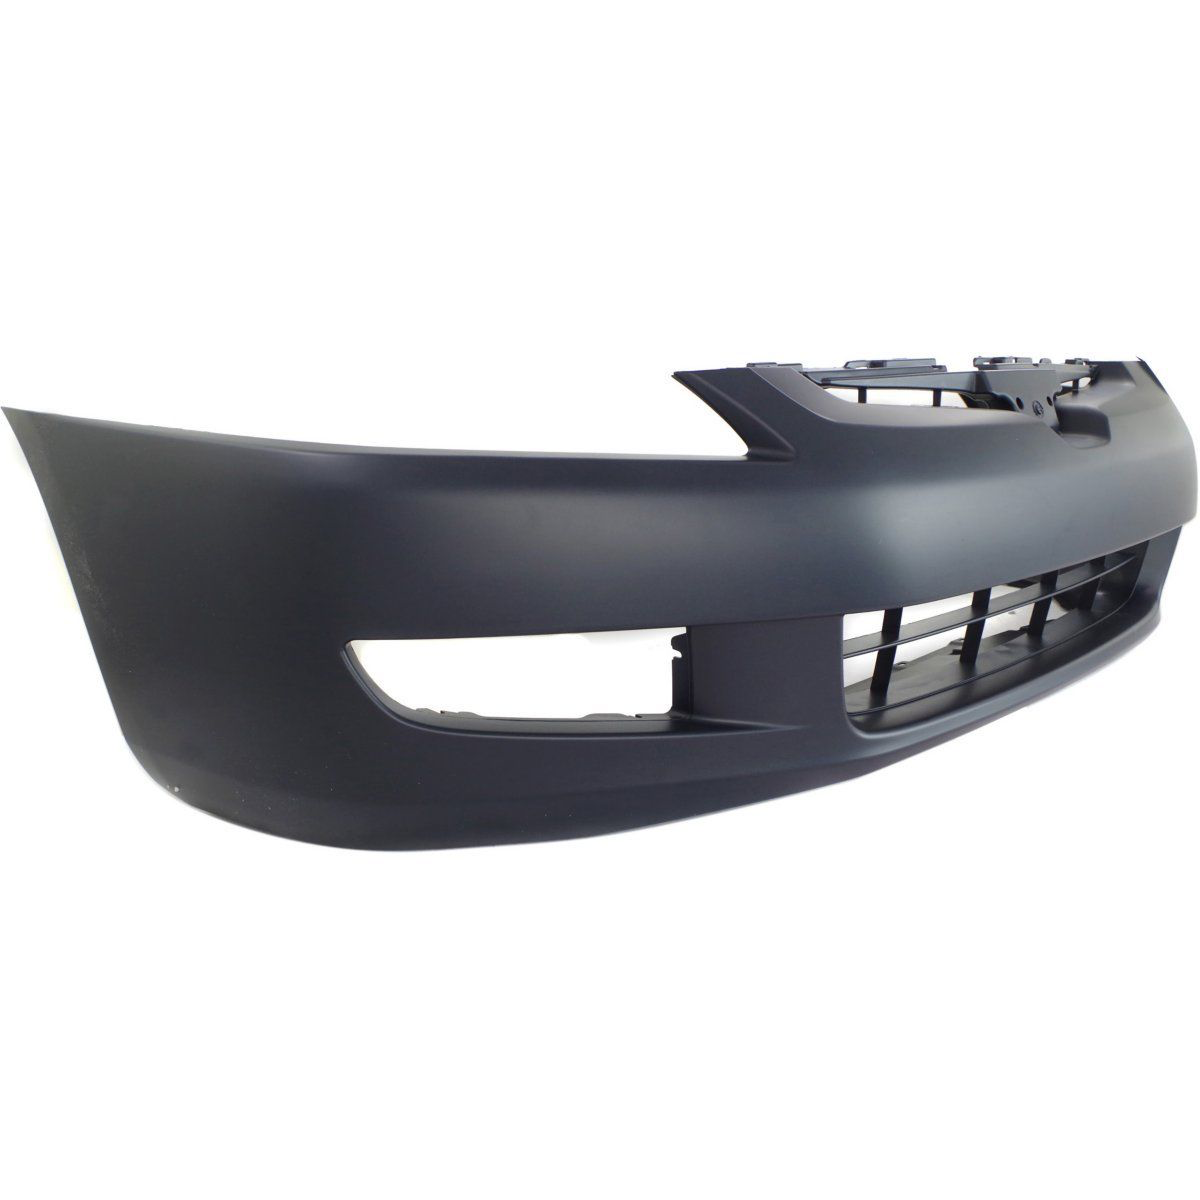 2003-2005 HONDA ACCORD Front Bumper Cover 2dr coupe  w/V6 engine  w/manuel trans Painted to Match